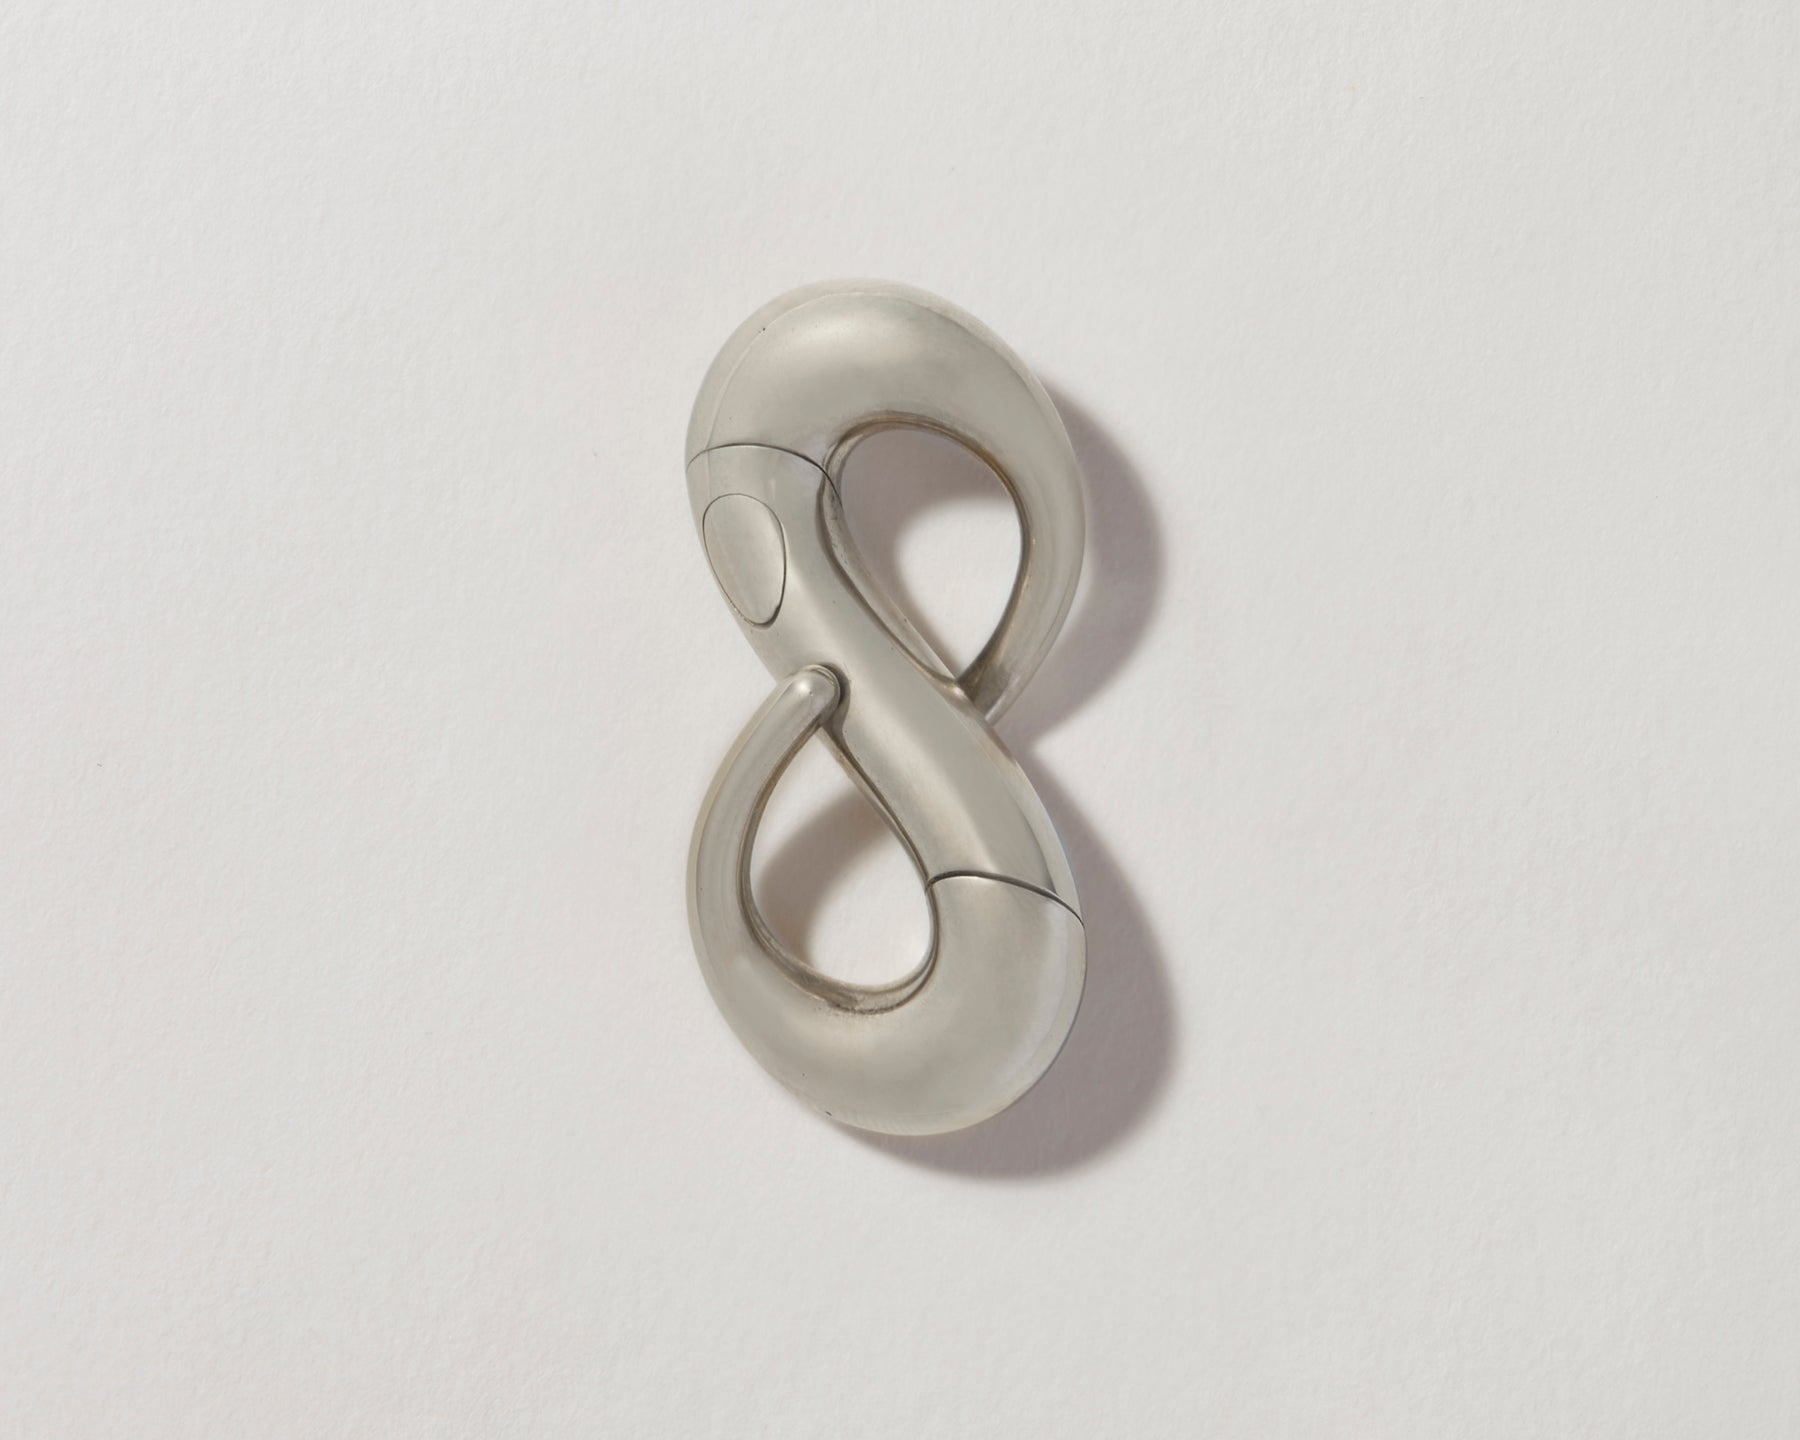 Silver gold infinity lock with clasp closed against gray backdrop